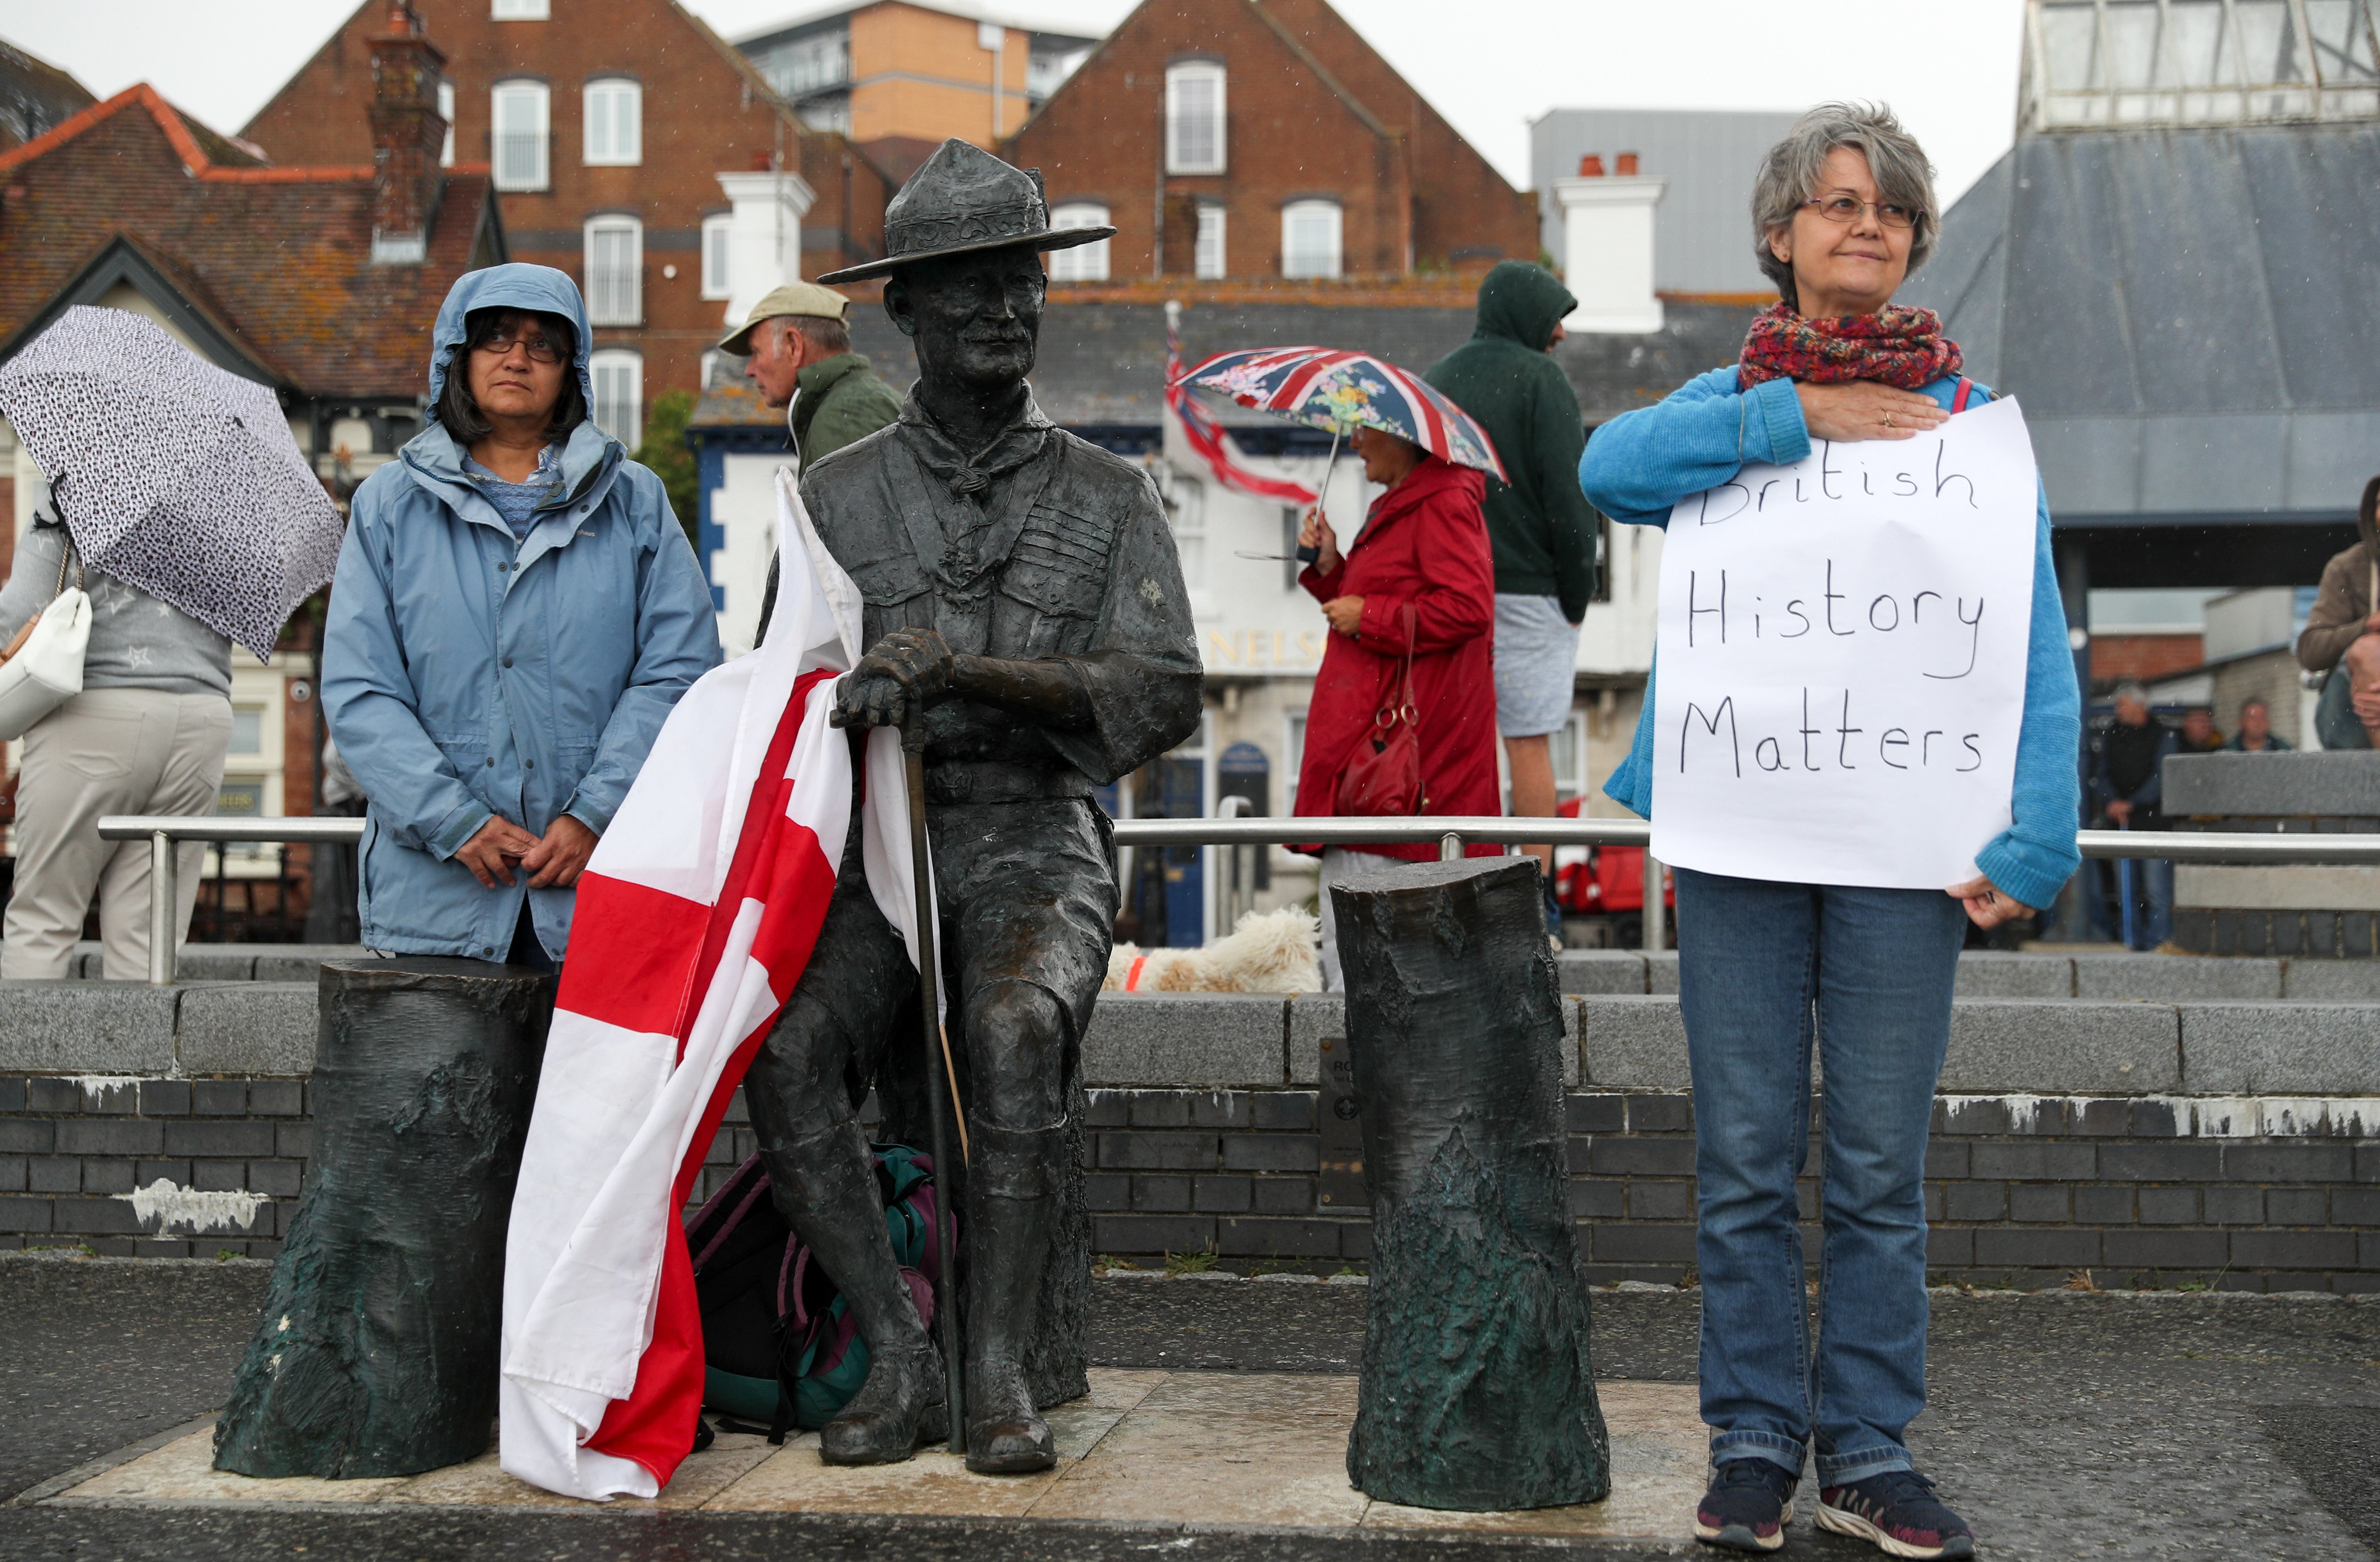 Locals show their support for a statue of Robert Baden-Powell on Poole Quay in Dorset ahead of its expected removal to "safe storage" following concerns about his actions while in the military and "Nazi sympathies". The action follows a raft of Black Lives Matter protests across the UK, sparked by the death of George Floyd, who was killed on May 25 while in police custody in the US city of Minneapolis.